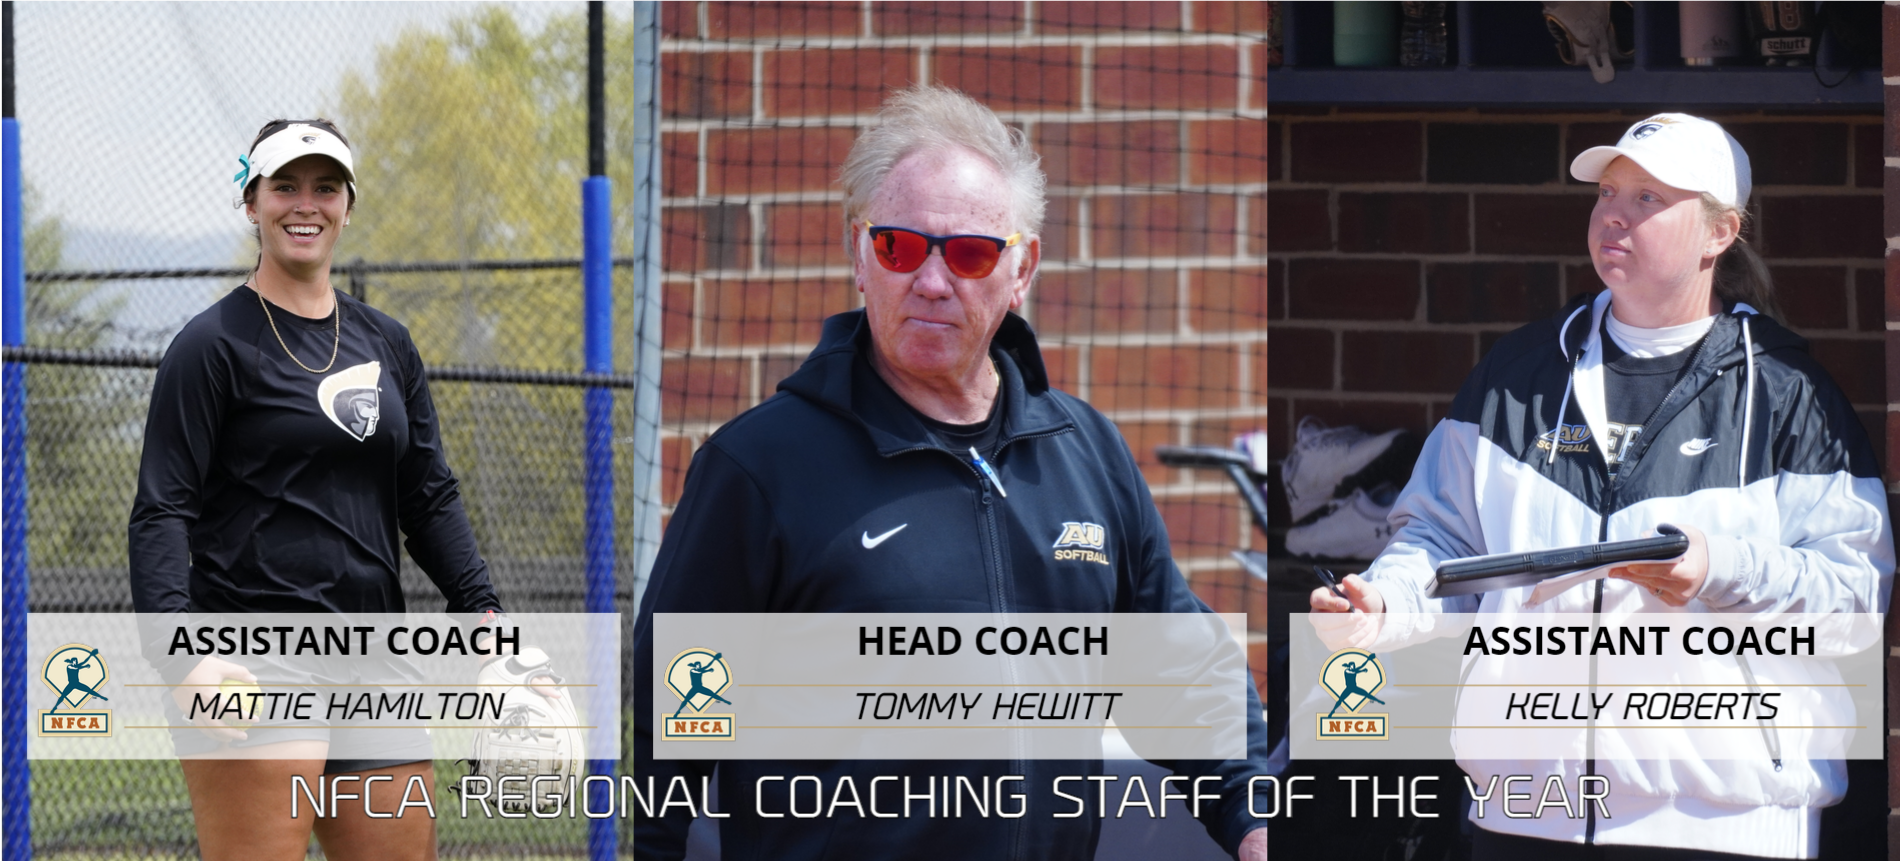 Anderson Softball Earns NFCA Southeast Regional Coaching Staff of the Year Honors